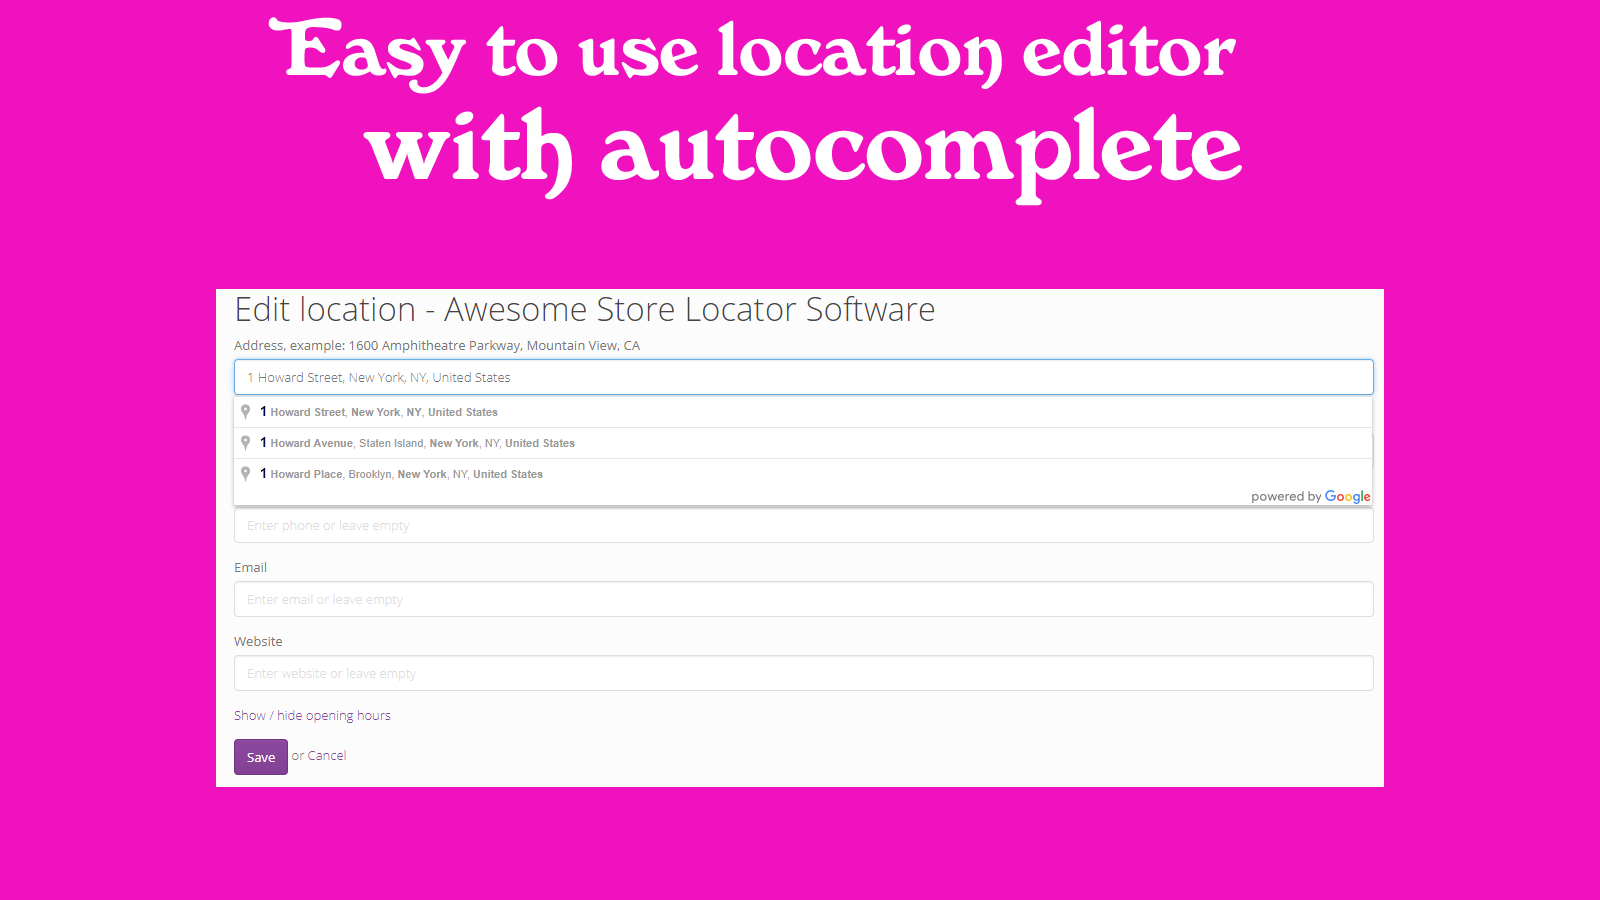 Backend admin features and easy to use editor with address autoc